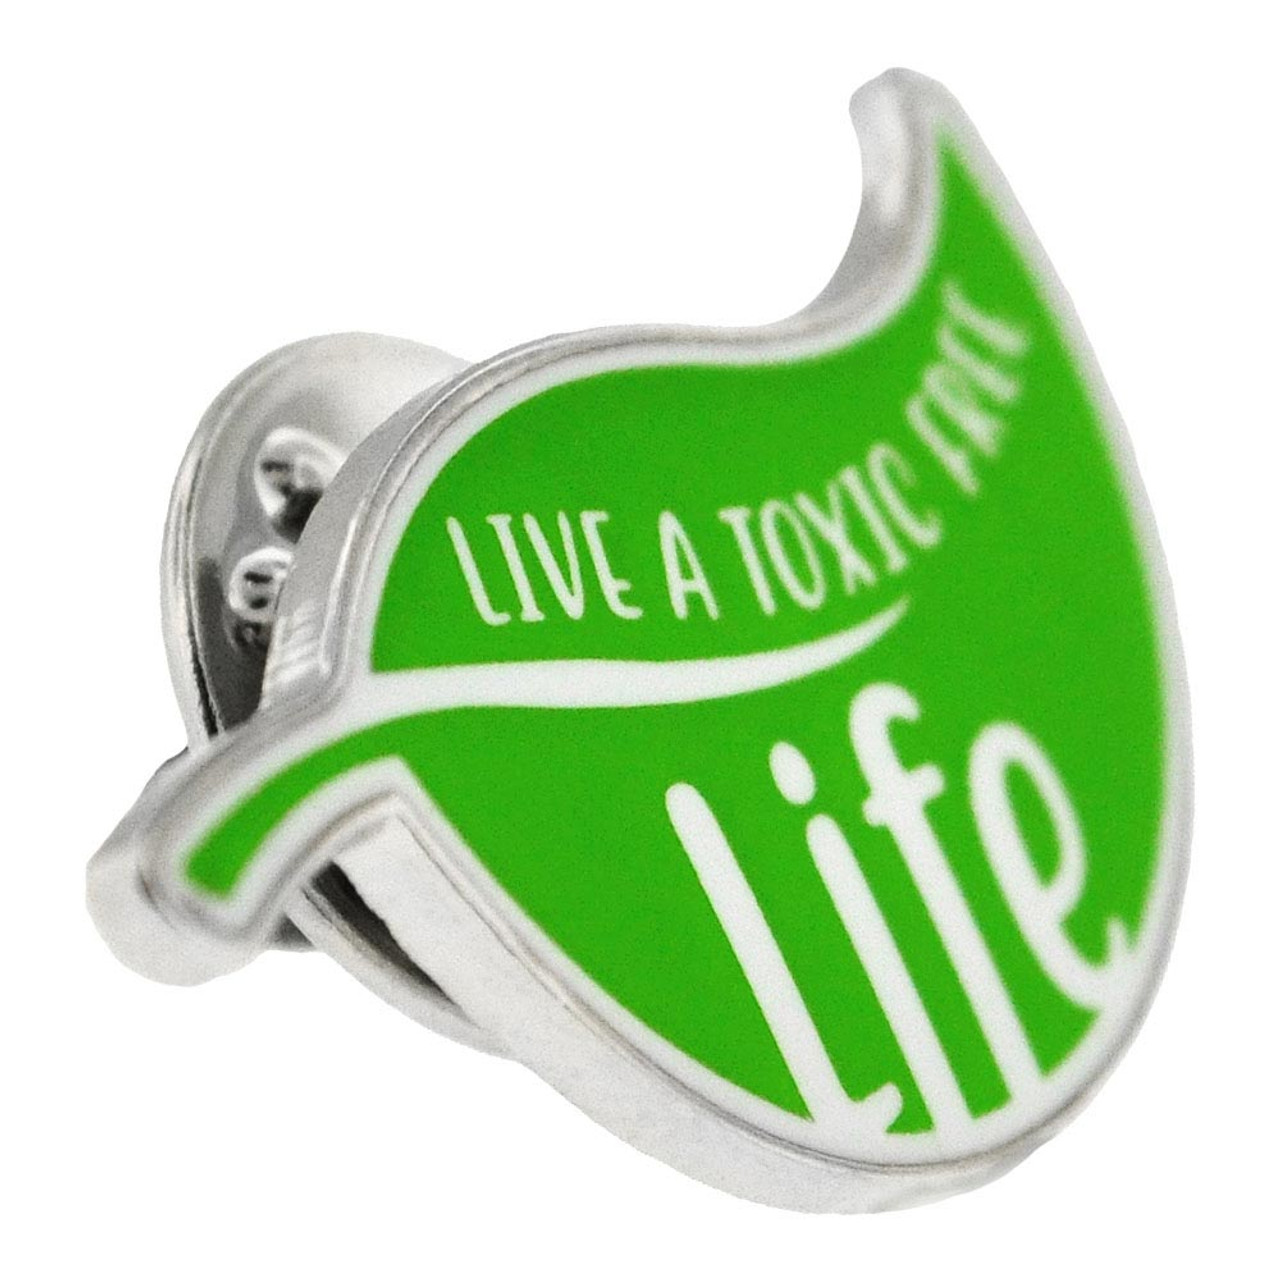 Pin on To Life